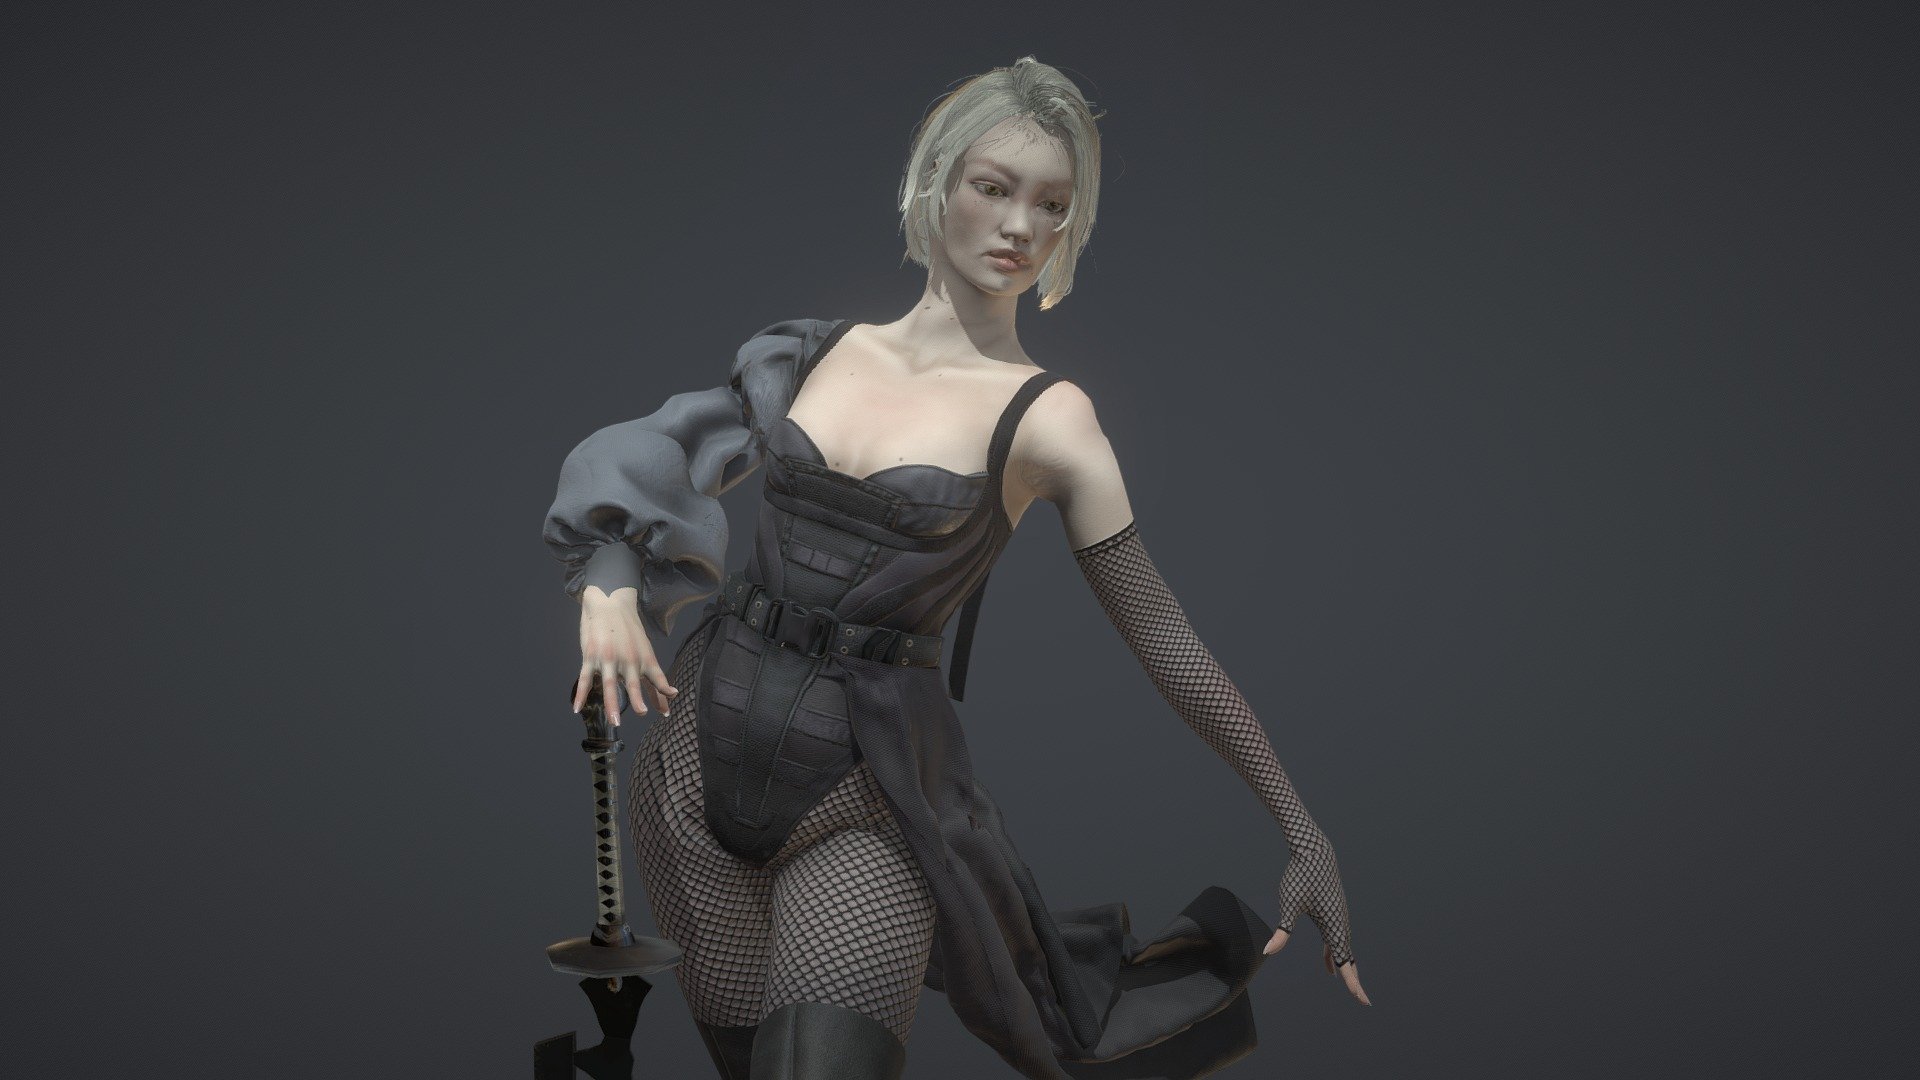 This project was inspired by NieR:Automata and from that point on I created both the character design and the game ready character - NieR:Automata inspired character - 3D model by Gabija Mackeviciute (@jjvmapg) 3d model